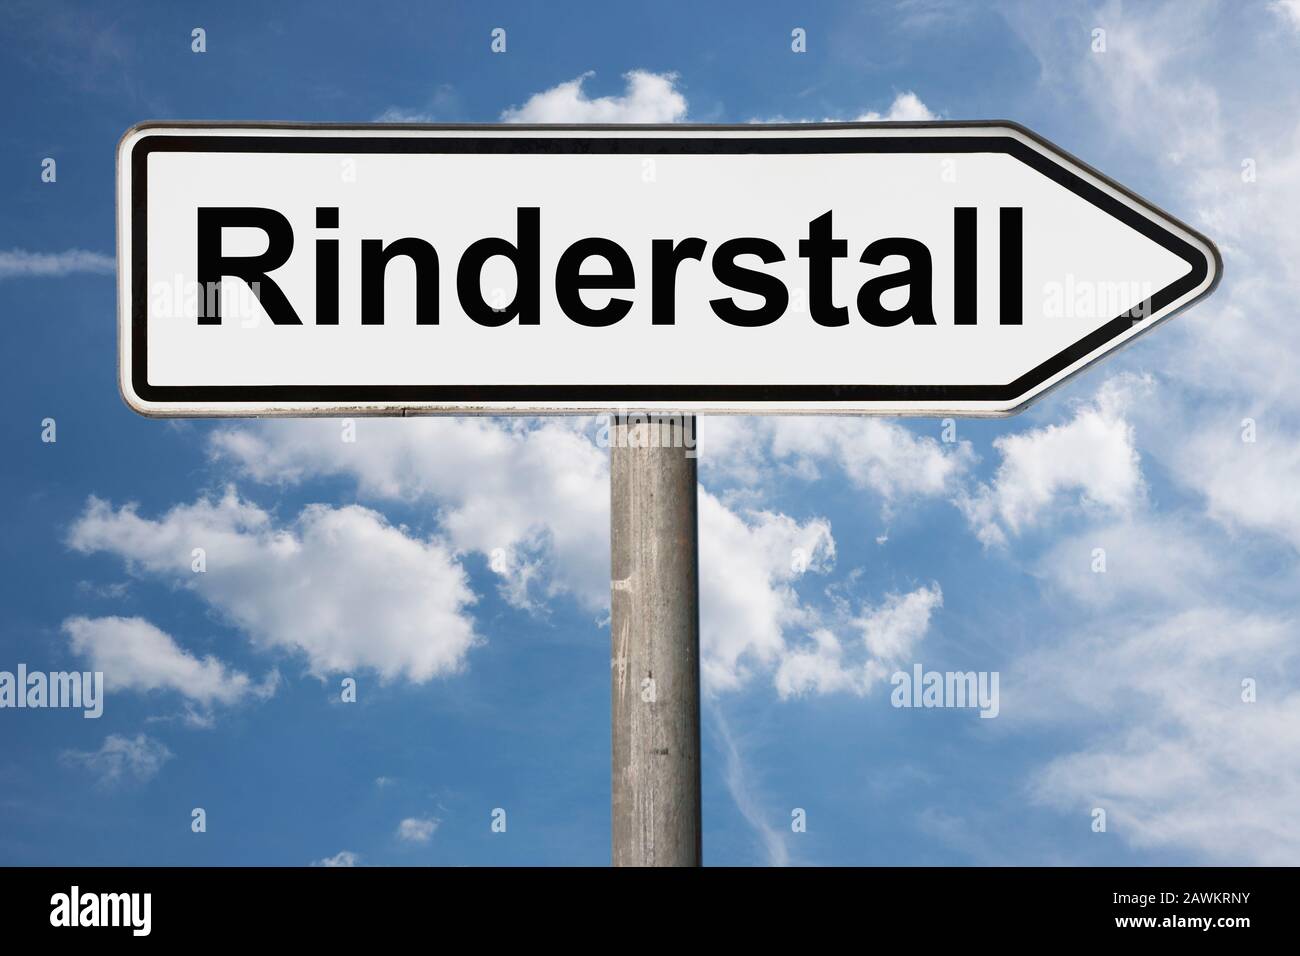 Detail photo of a signpost with the inscription Rinderstall (Cattle stable) Stock Photo